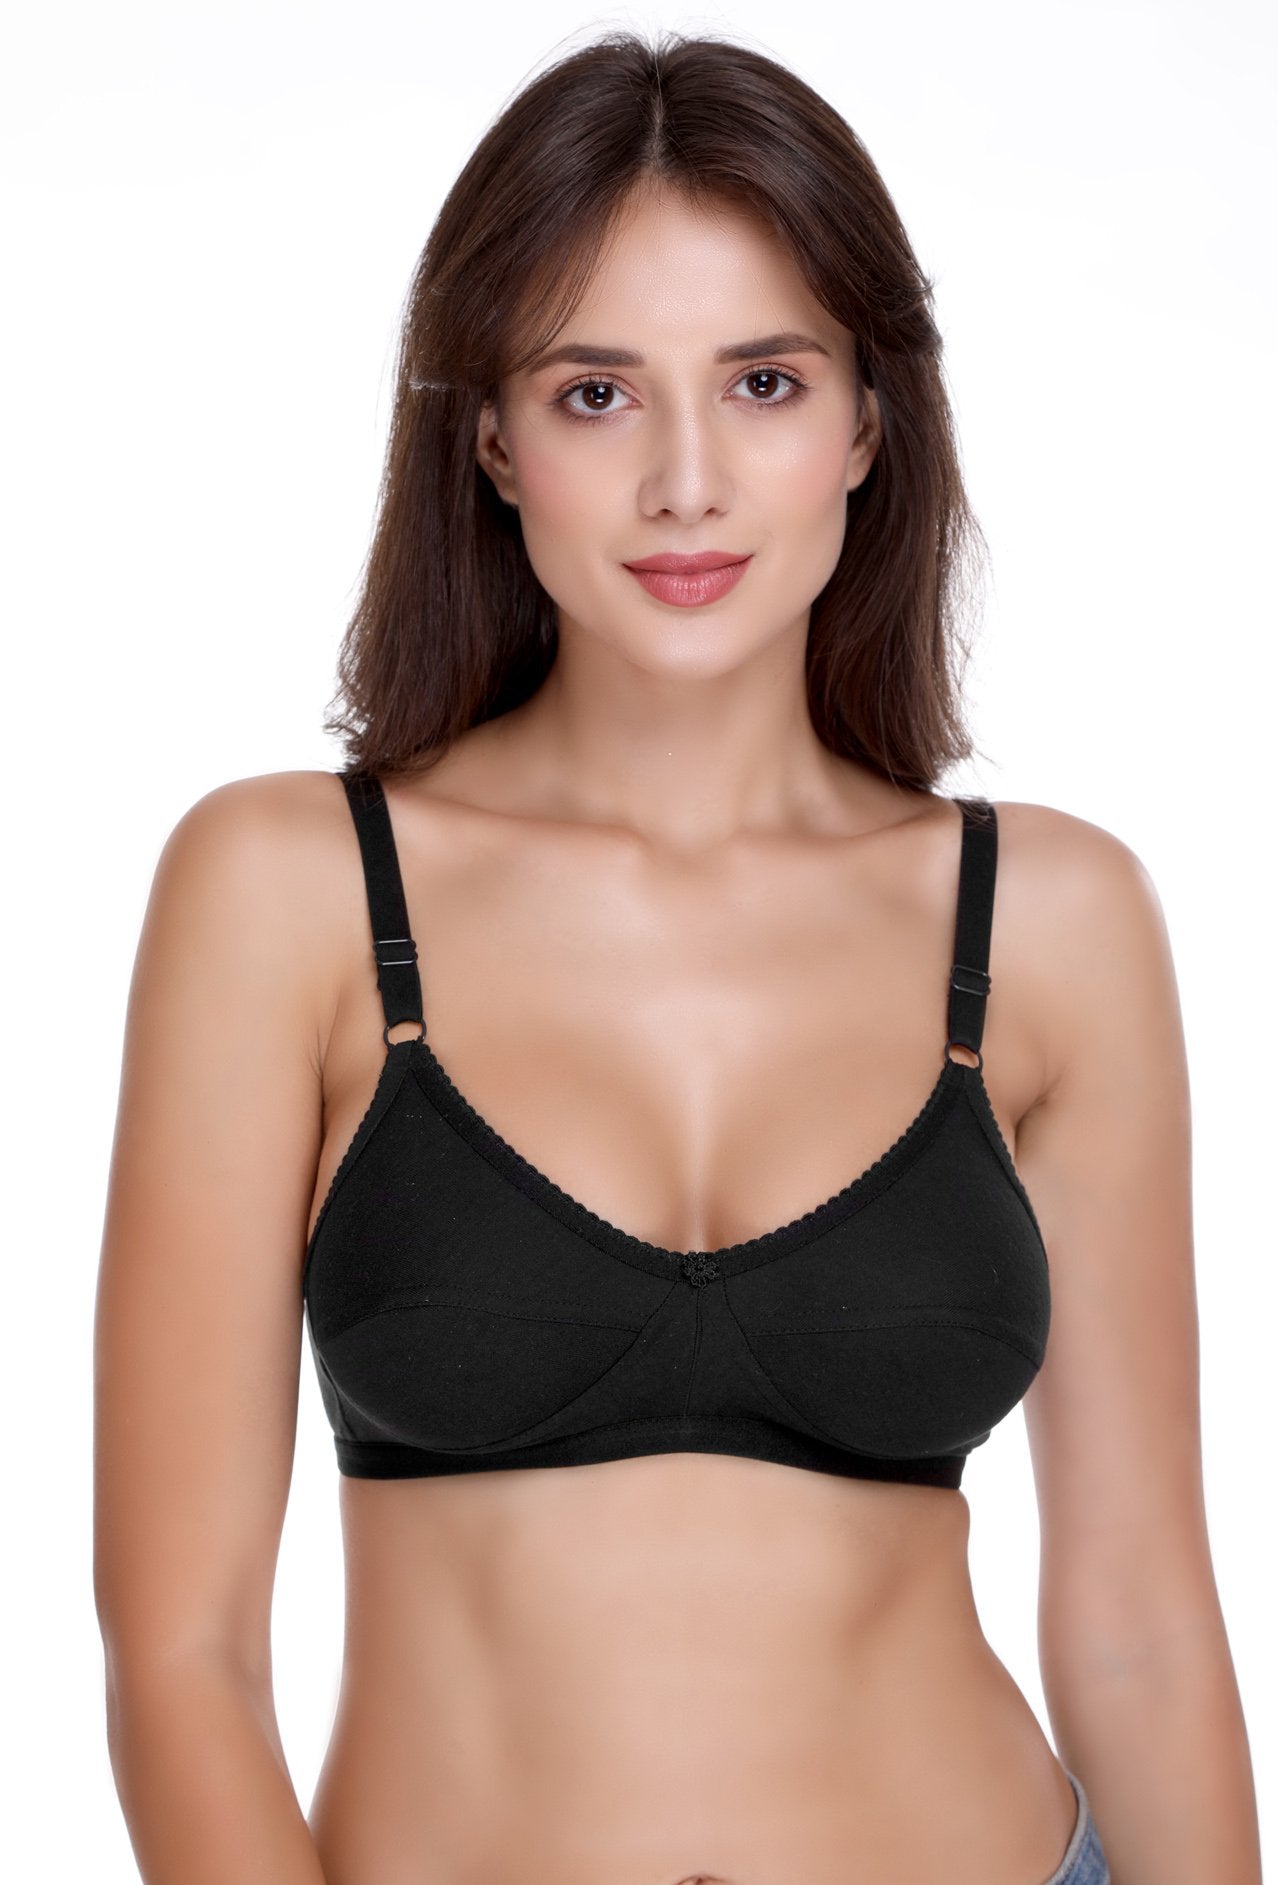 SONA by BEE-HEART Full Coverage Everyday 100% Cotton Elastic Strap